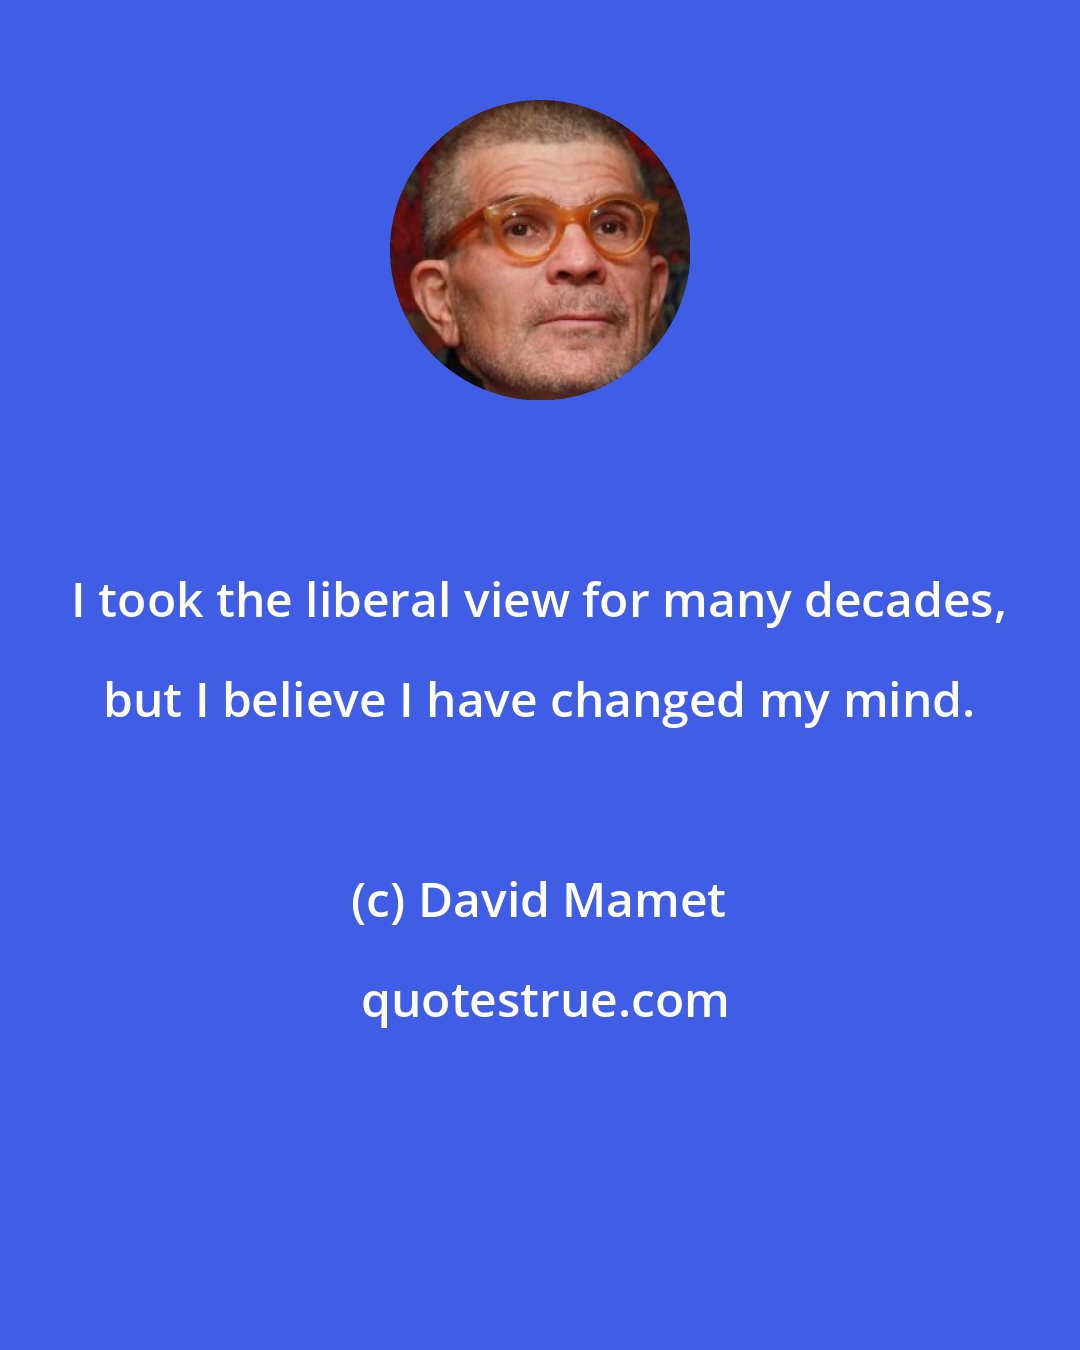 David Mamet: I took the liberal view for many decades, but I believe I have changed my mind.